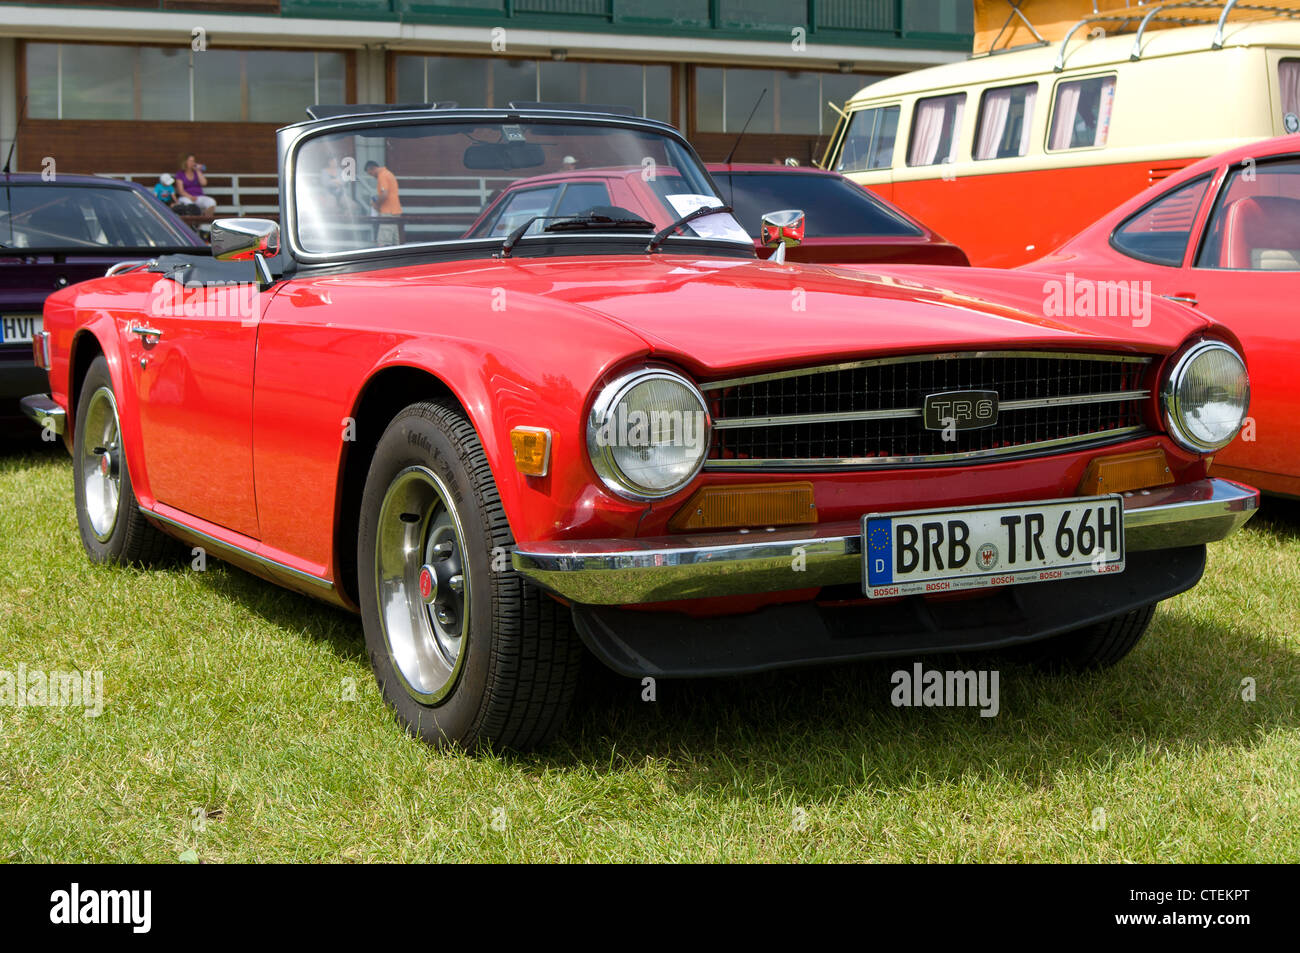 PAAREN IM GLIEN, GERMANY - MAY 26: Car Triumph TR6, "The oldtimer show" in  MAFZ, May 26, 2012 in Paaren im Glien, Germany Stock Photo - Alamy